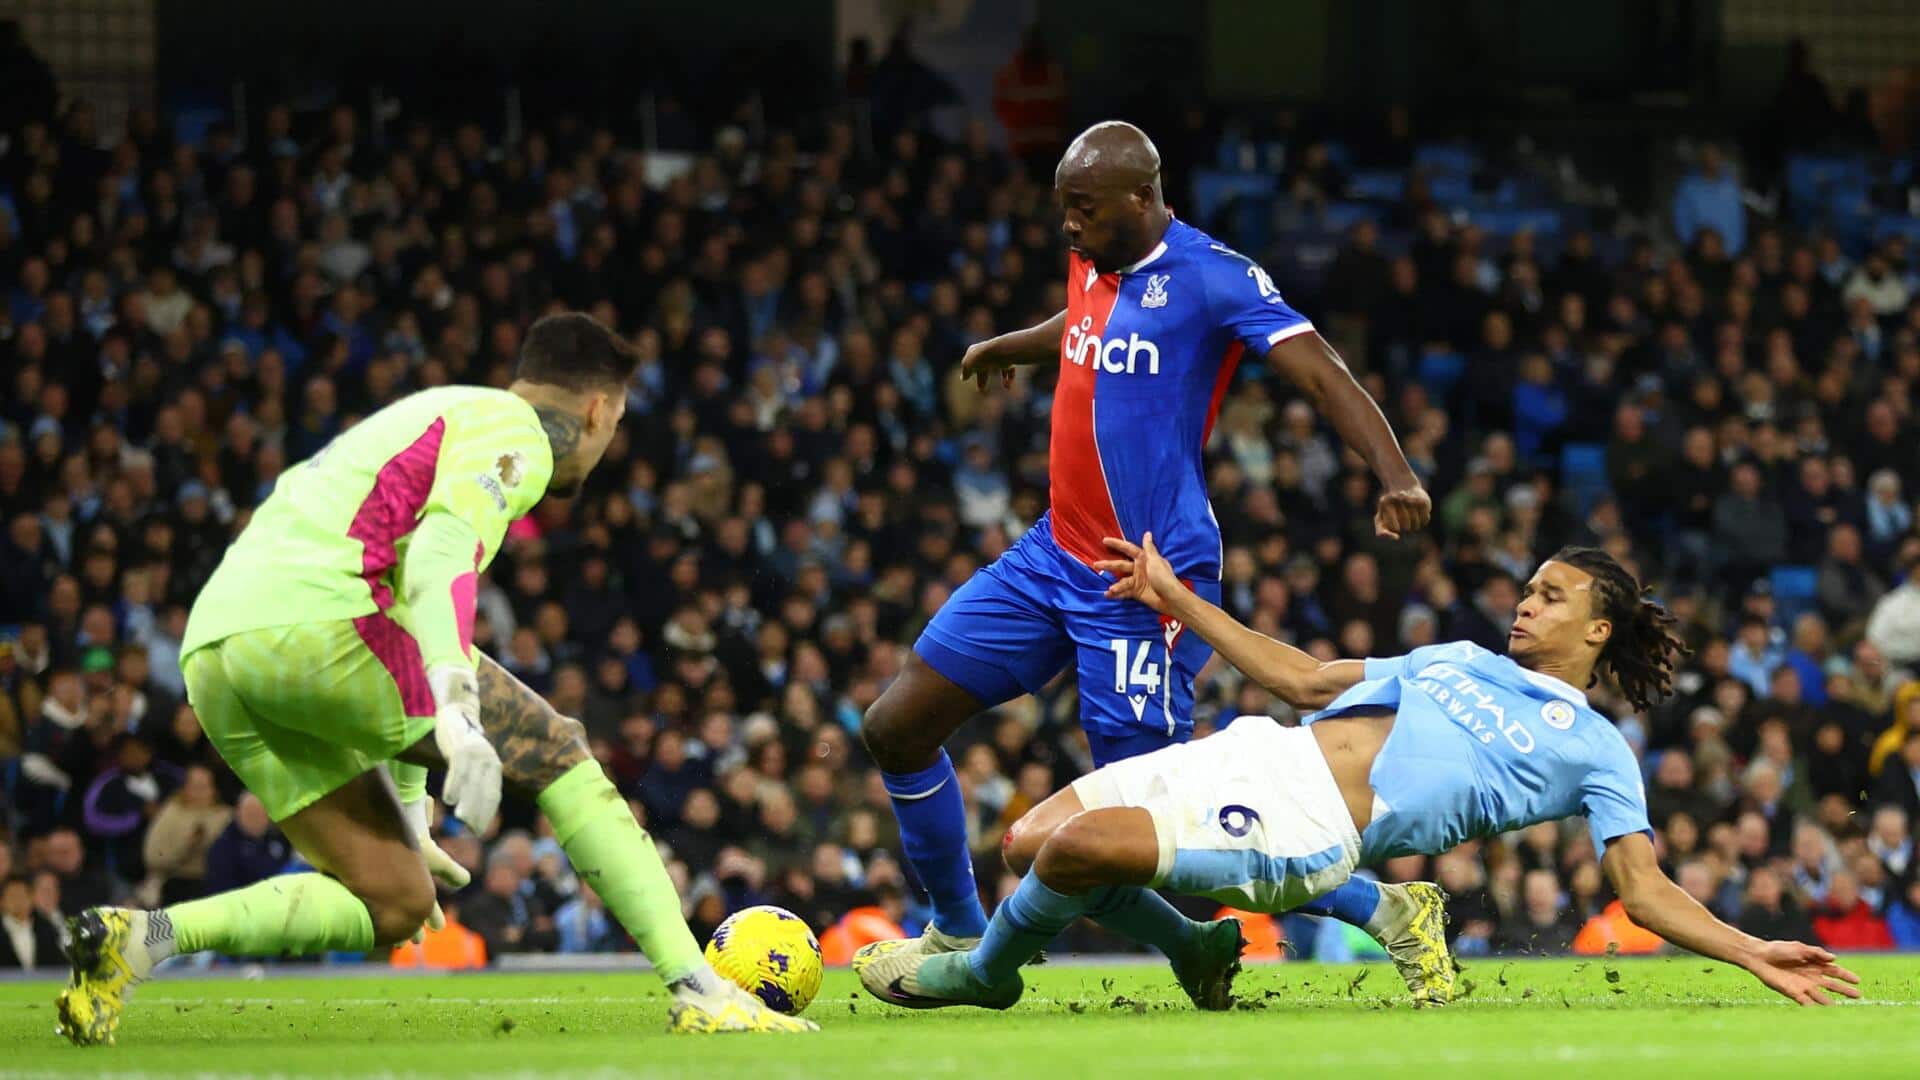 Premier League: Crystal Palace hold Manchester City to 2-2 draw